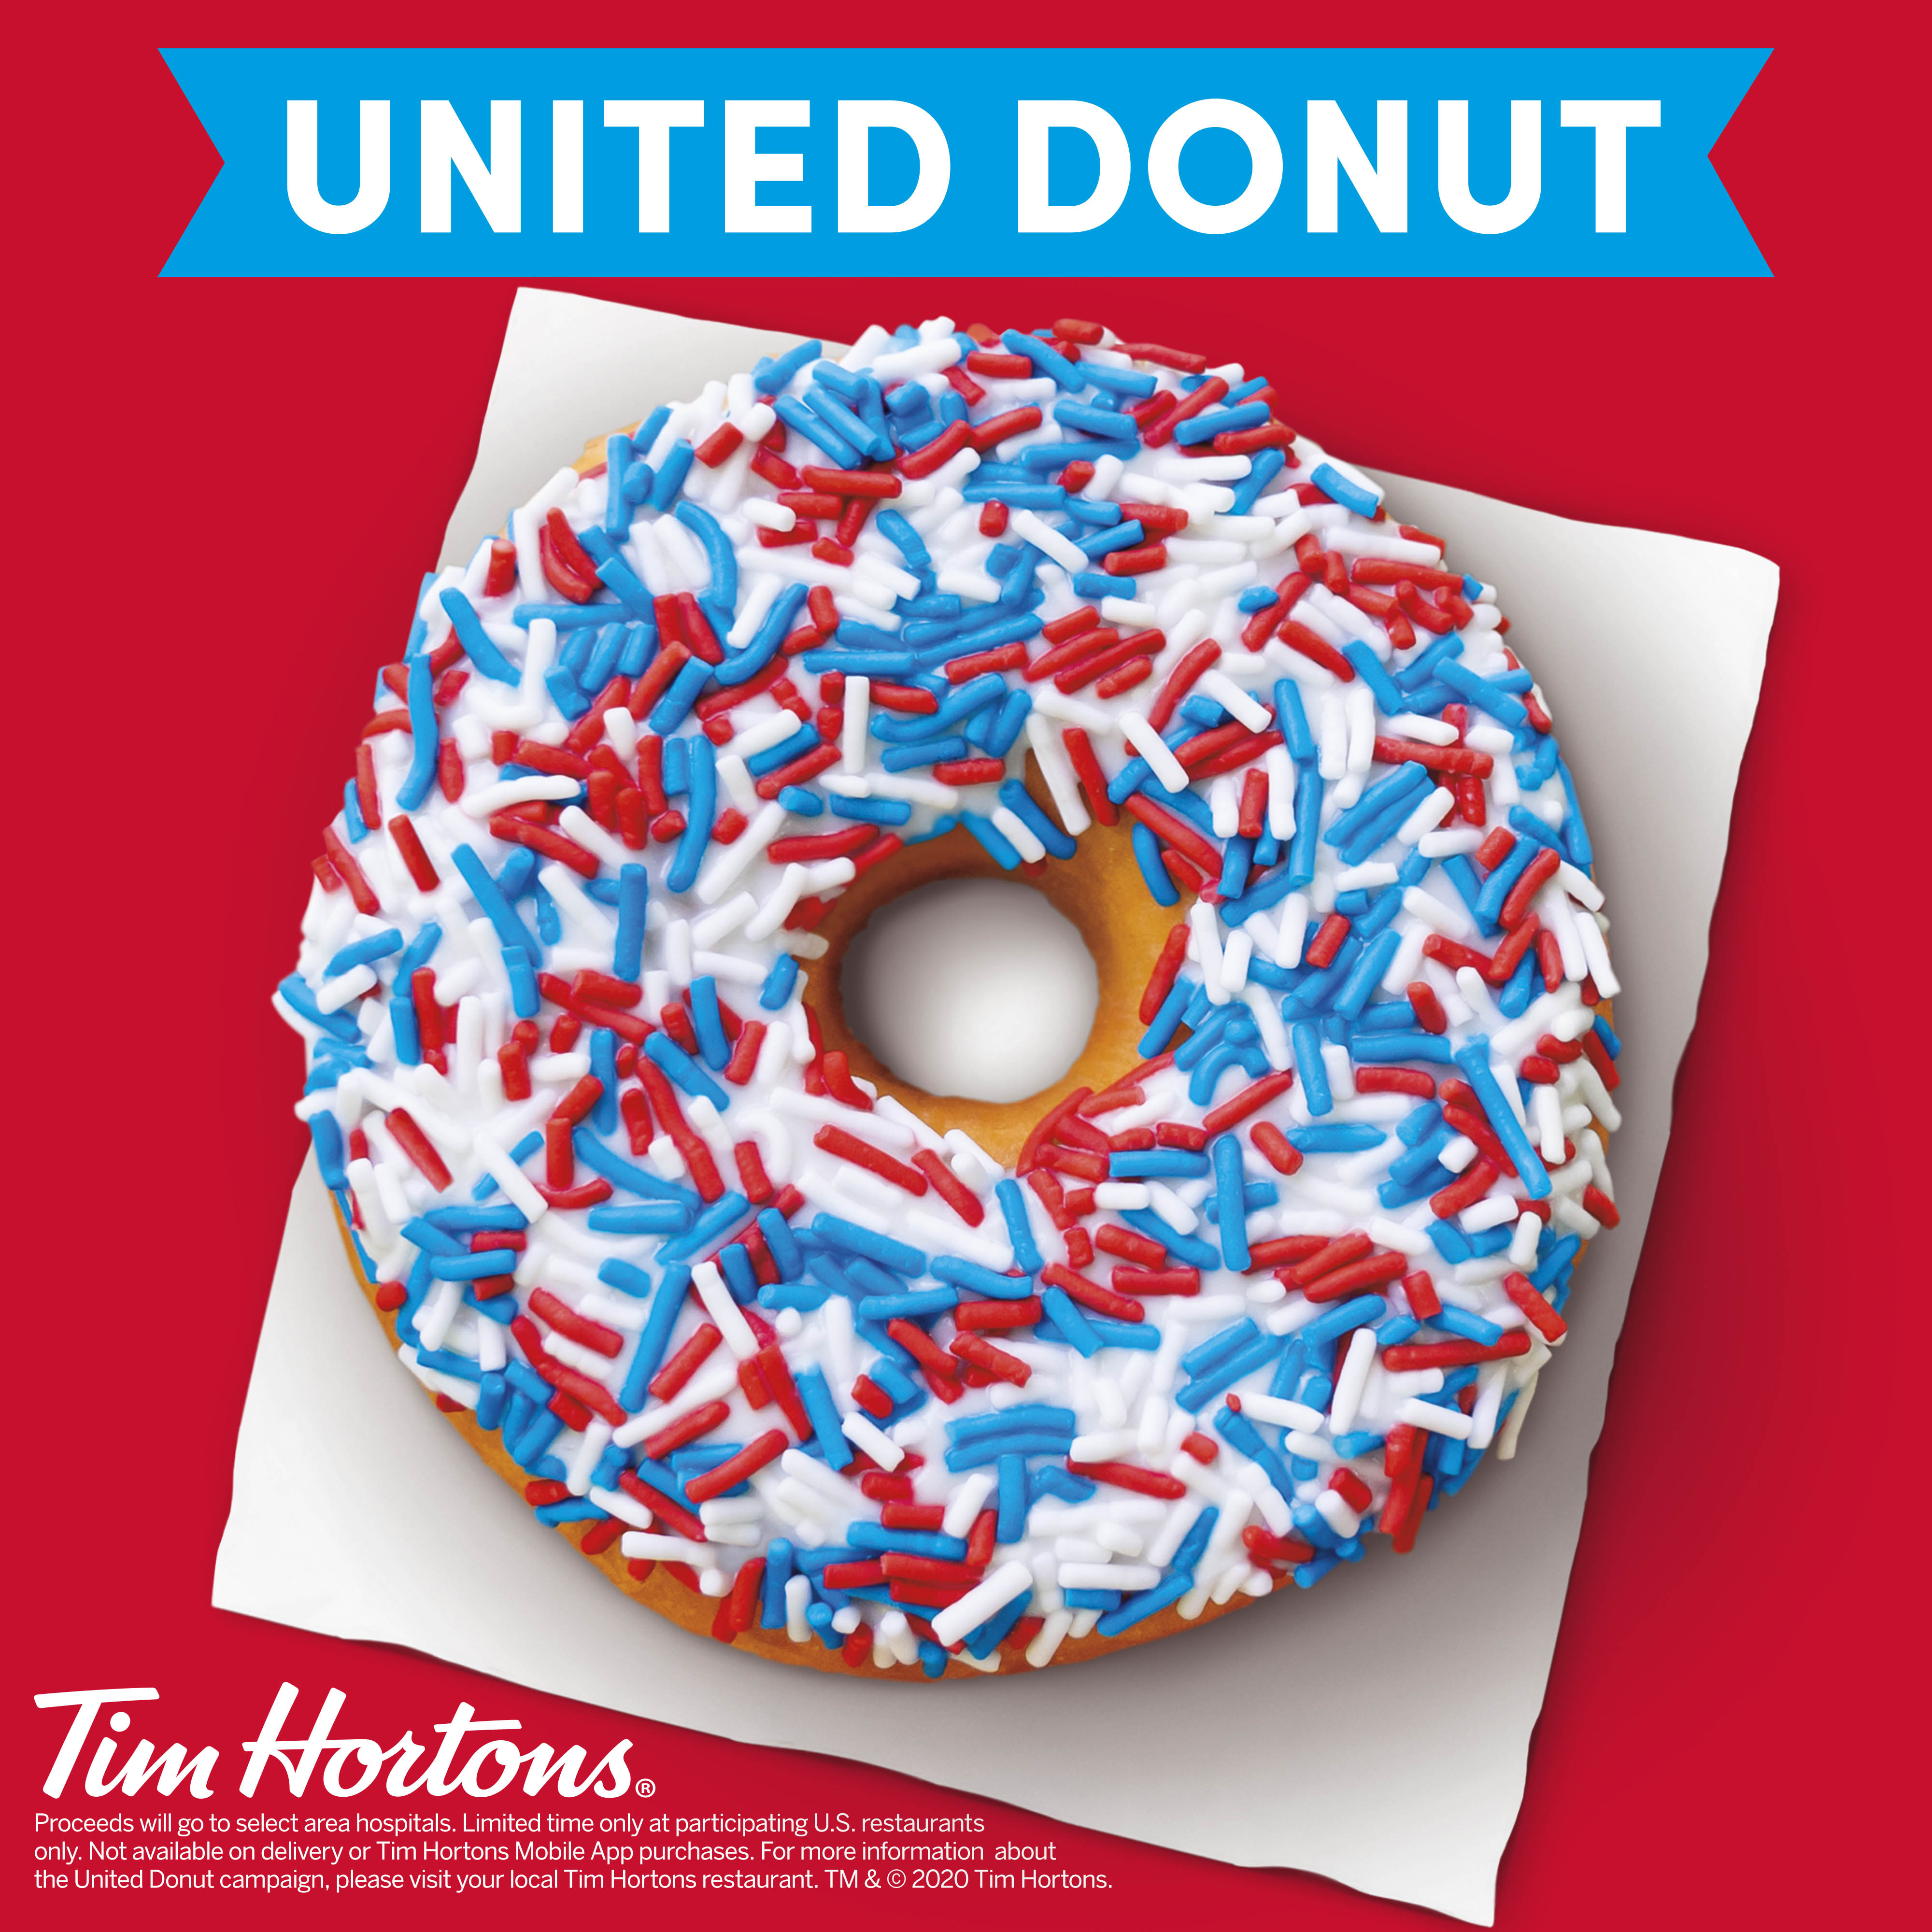 Tim Hortons United Donut is a perfect reason to buy a dozen